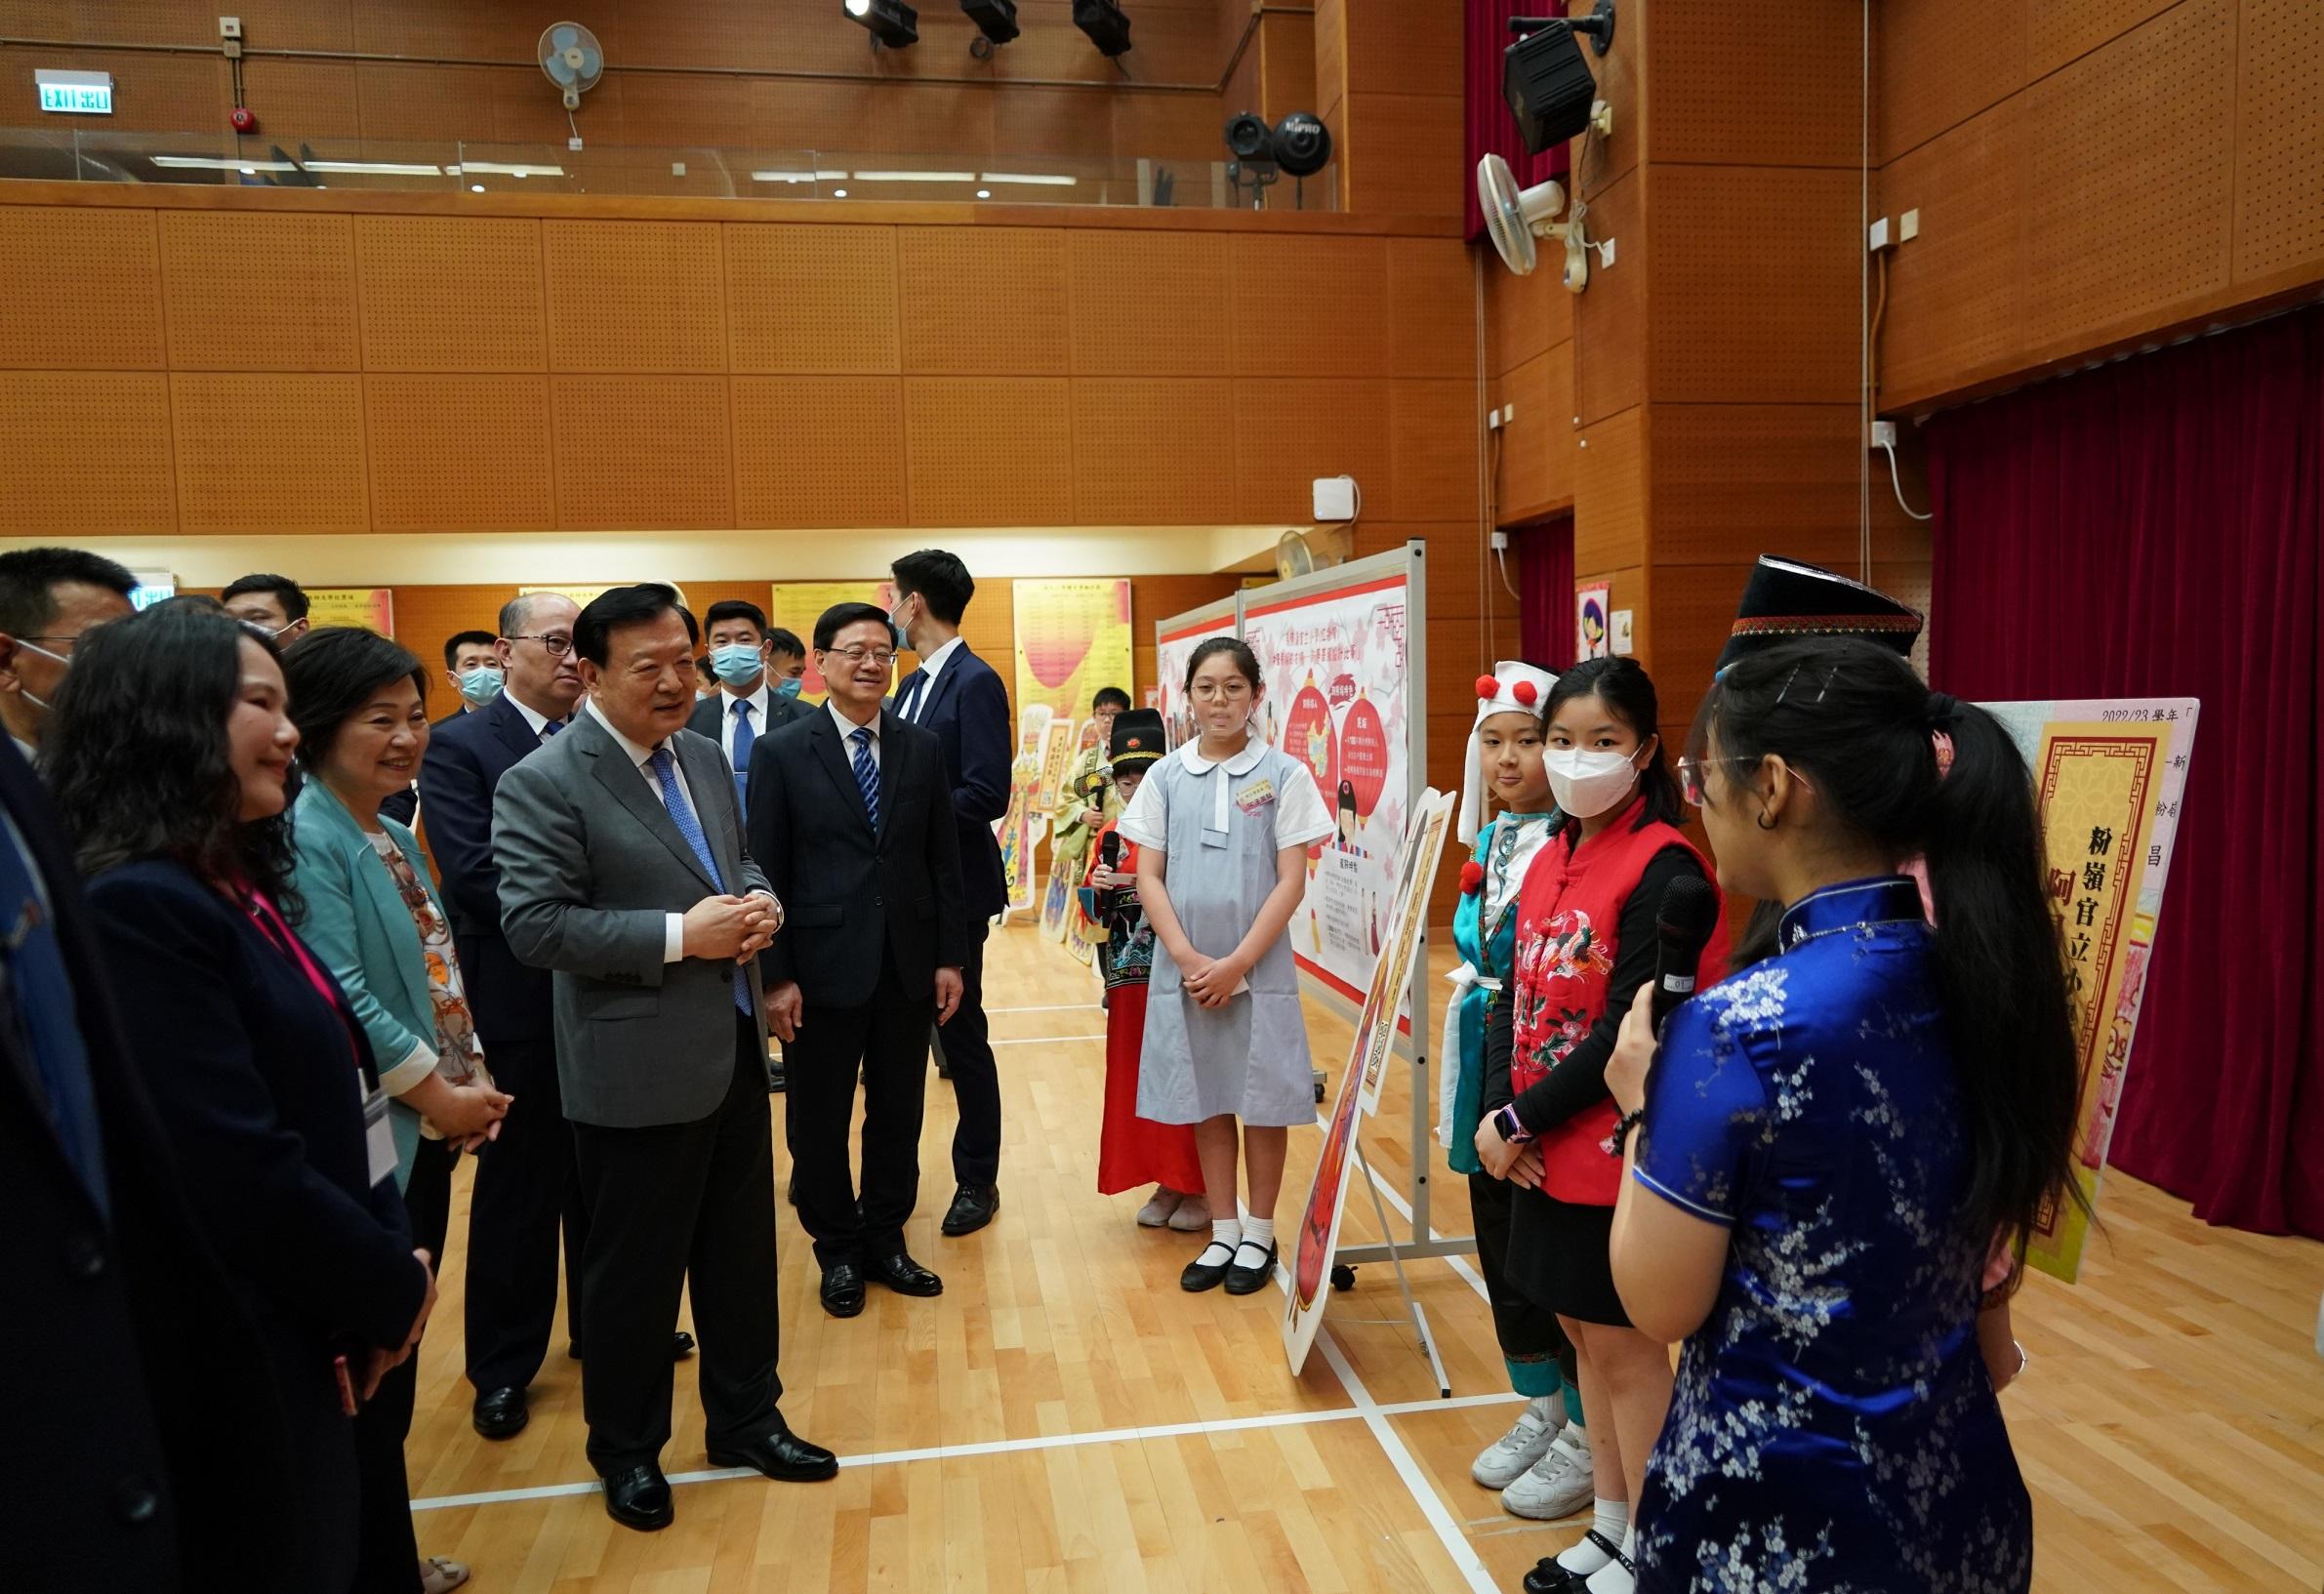 The Vice Chairman of the 13th Chinese People's Political Consultative Conference and Director of the Hong Kong and Macao Affairs Office of the State Council, Mr Xia Baolong (third left), accompanied by the Chief Executive, Mr John Lee (fourth left), and the Secretary for Education, Dr Choi Yuk-lin (second left), visited Ma Tau Chung Government Primary School (Hung Hom Bay) on April 18. Photo shows Mr Xia listening to students' sharing on their learning experience.